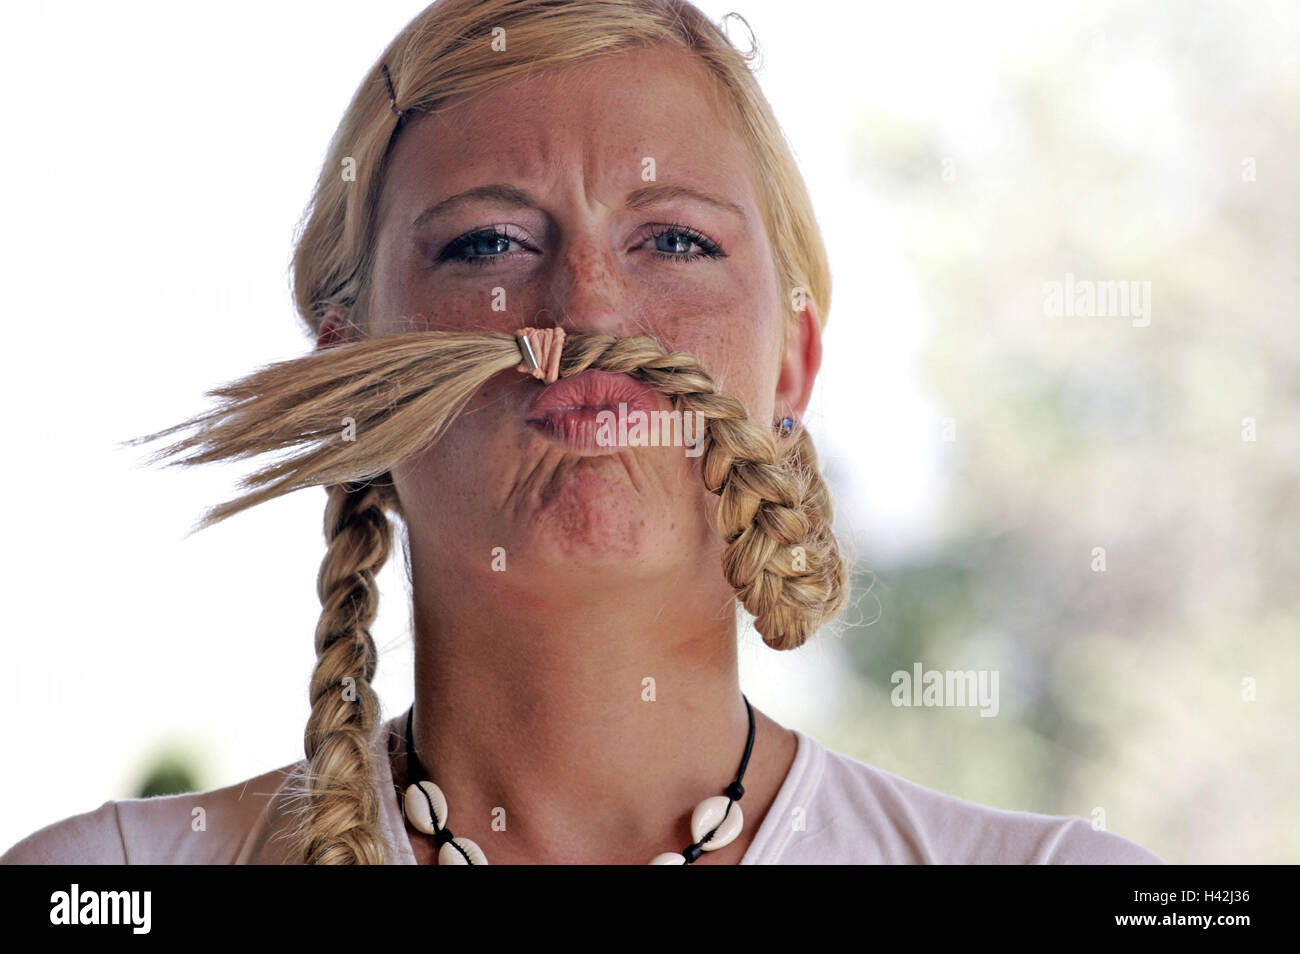 Woman Young Blond Braids Mustache Facial Expression